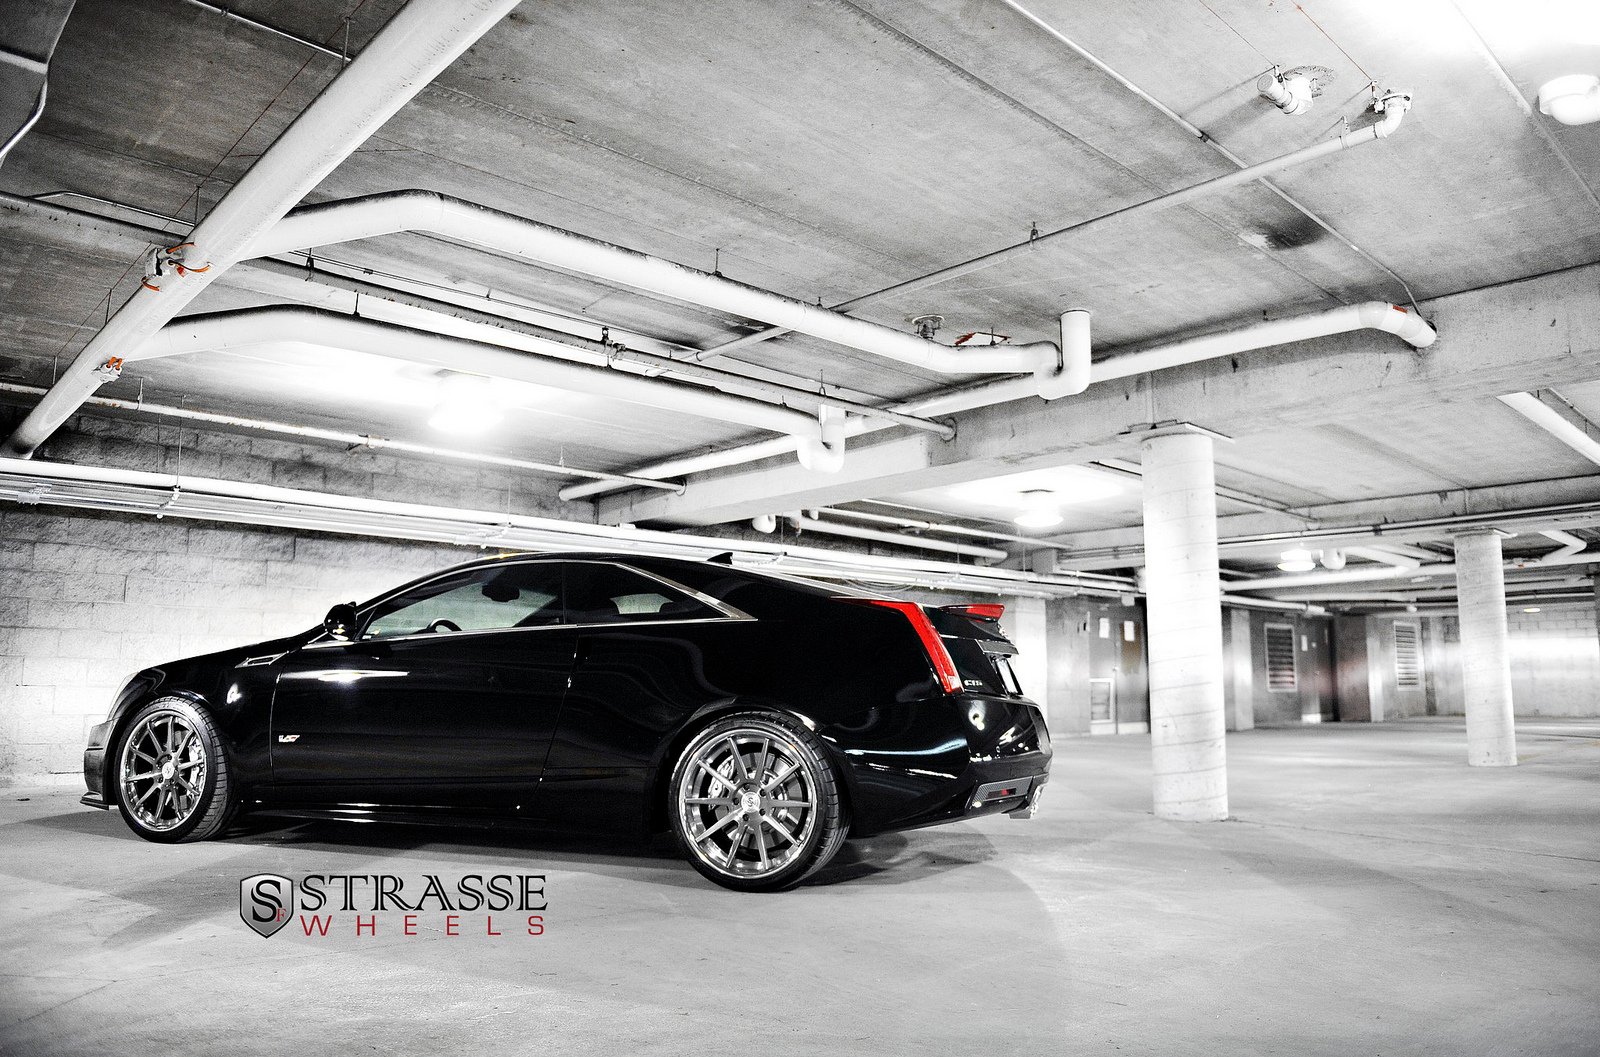 cadillac, Cars, Coupe, Cts, V, Strasse, Tuning, Wheels, Black Wallpaper